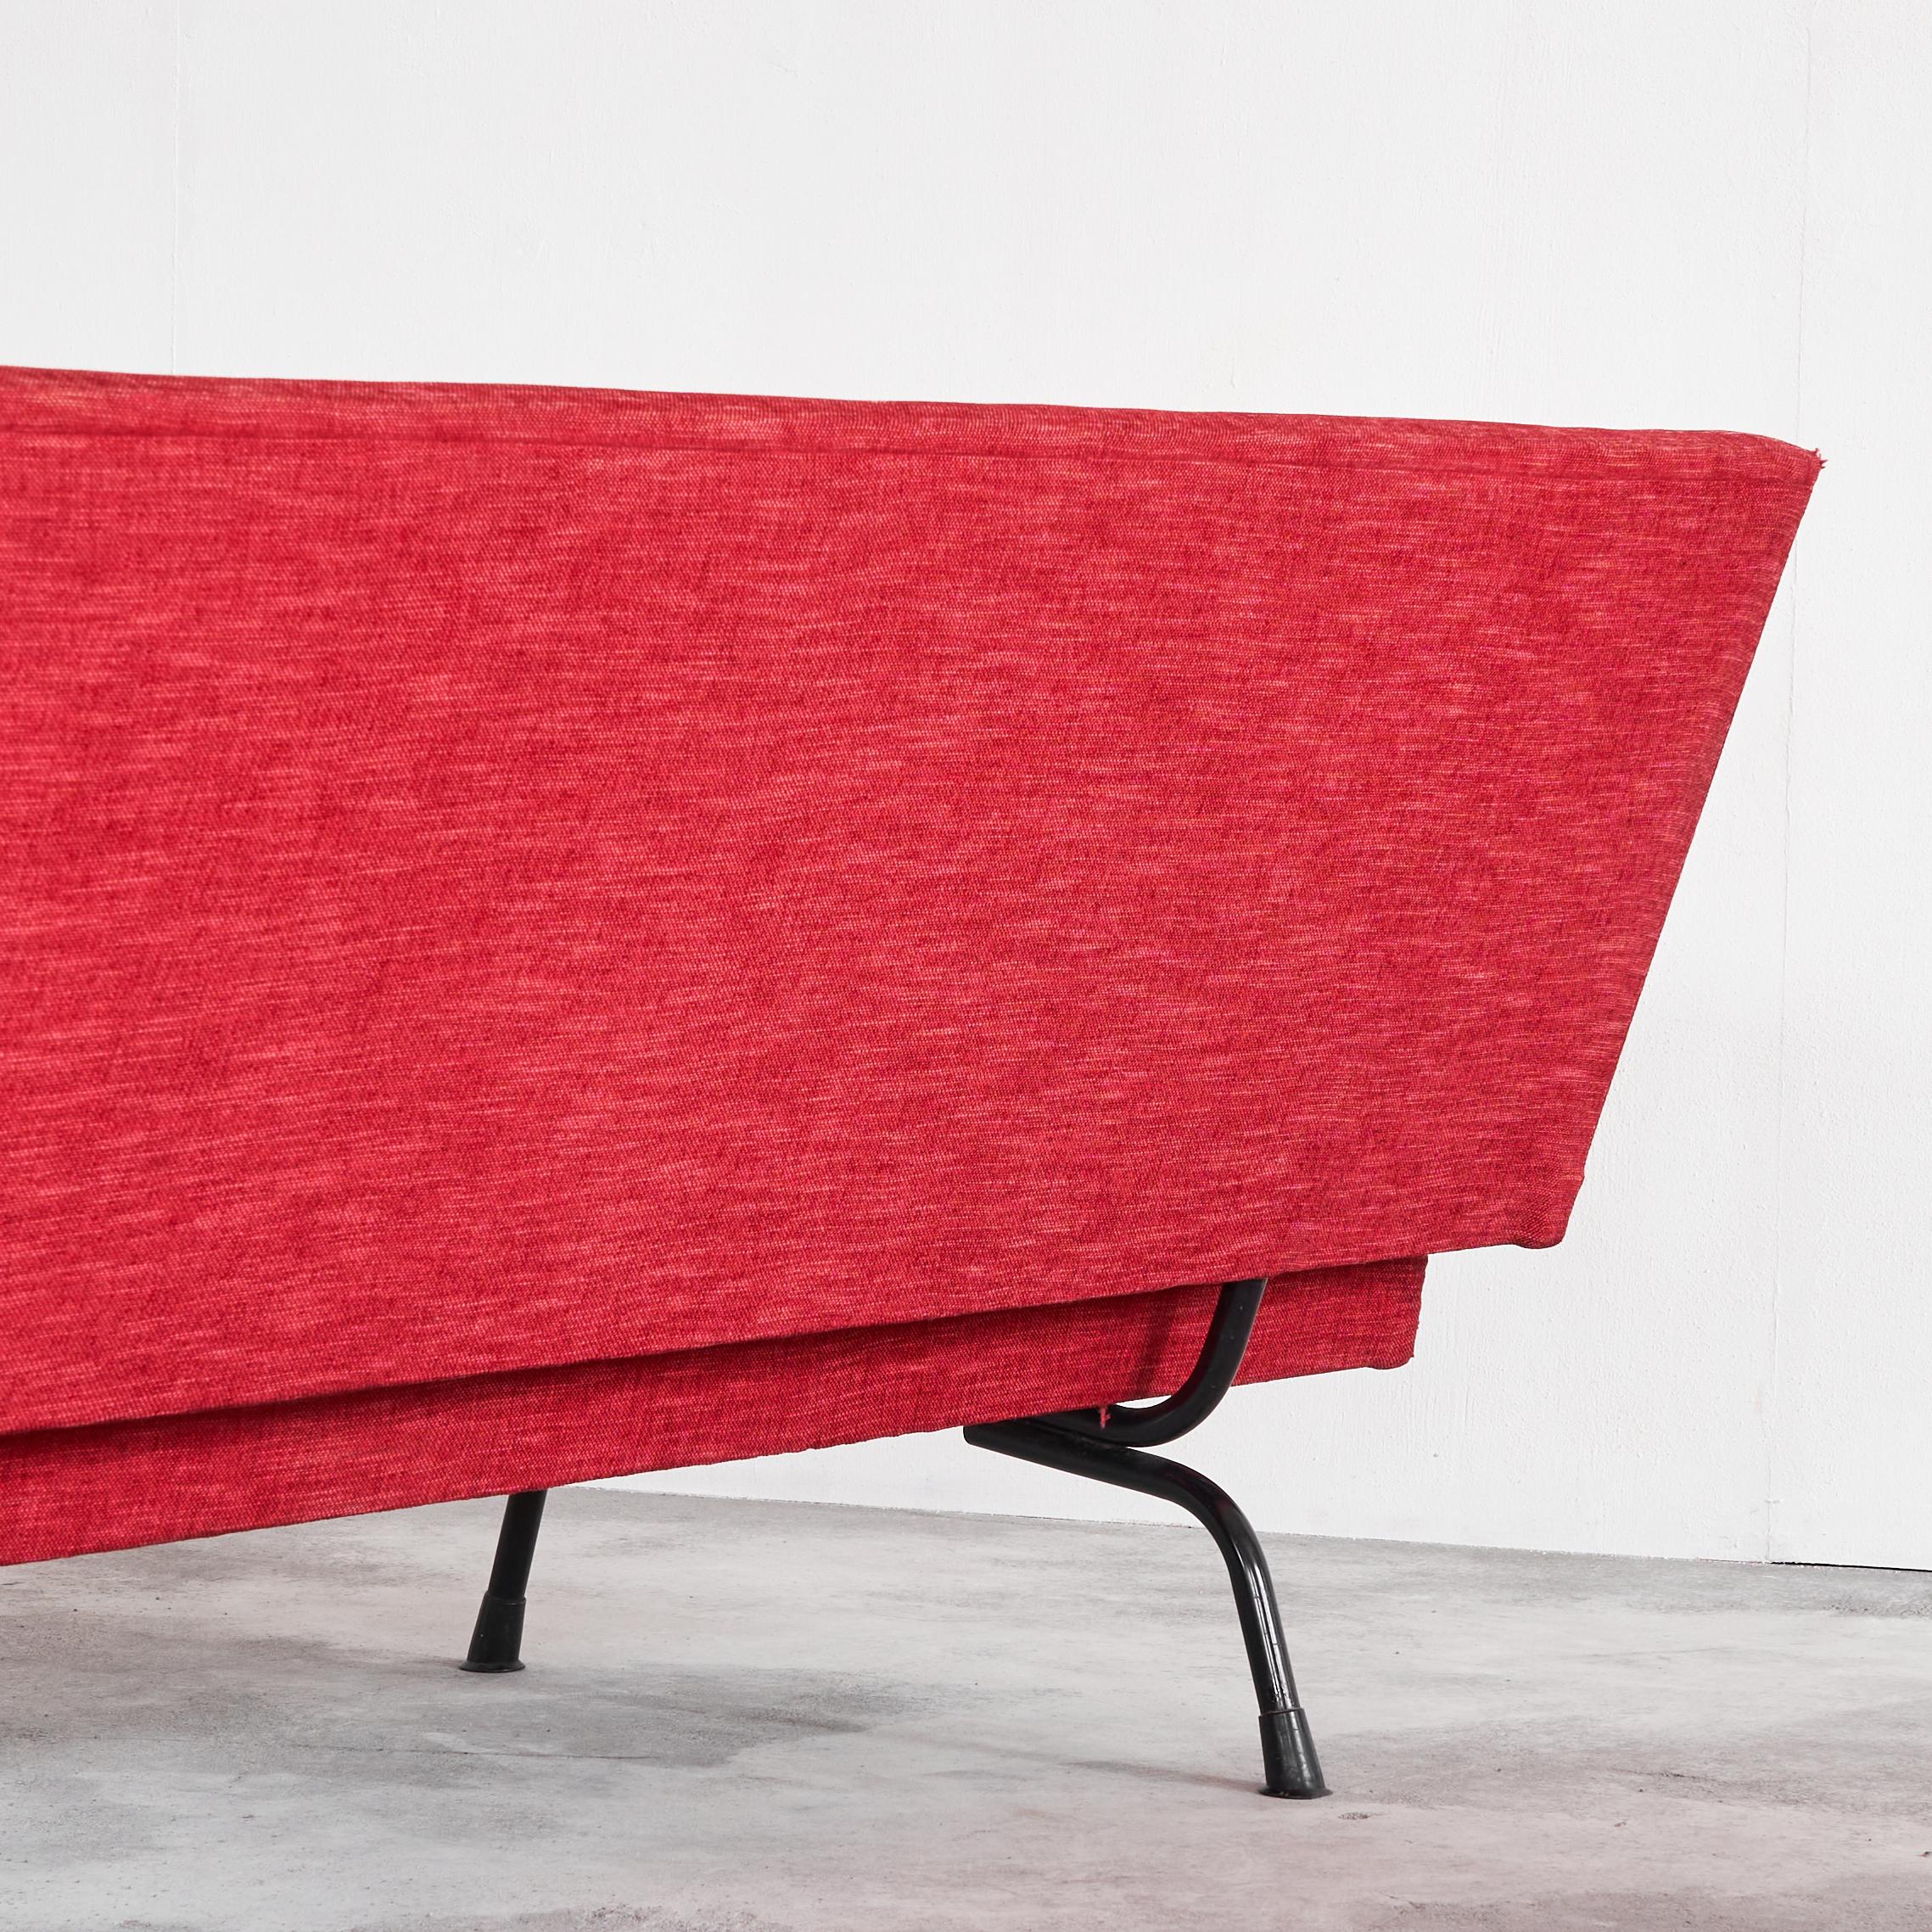 Wim Rietveld '447' Sofa in Red Fabric 1950s For Sale 2